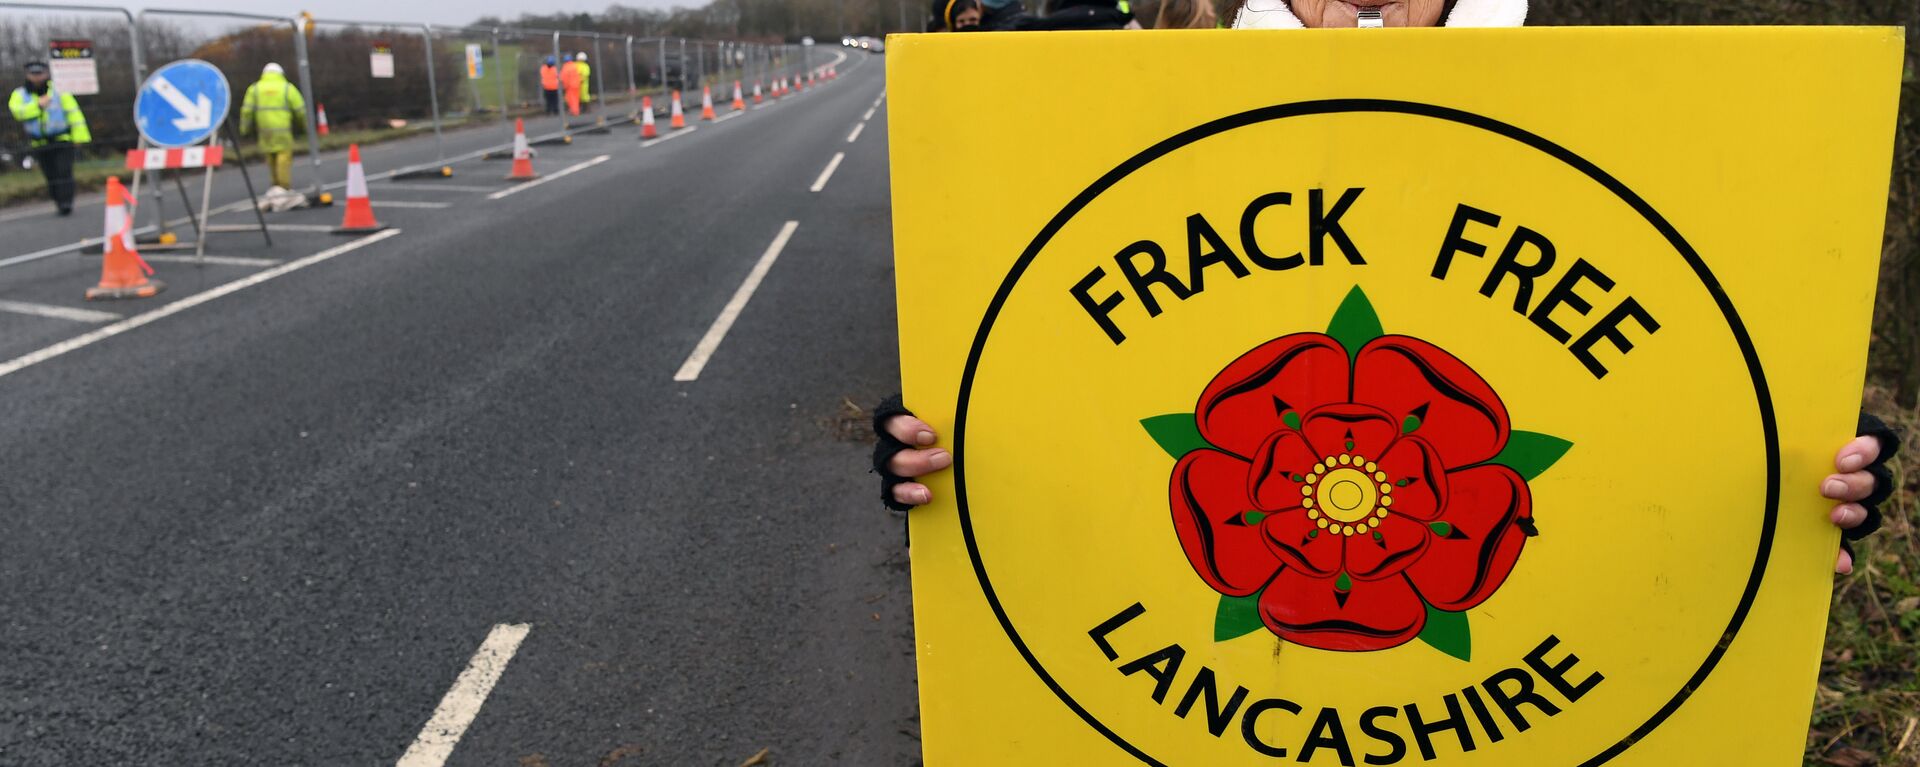 (File) Protesters hold placards at the Preston New Road site where Energy firm Cuadrilla are setting up fracking (hydraulic fracturing) operations at Little Plumpton near Blackpool in northwest England on January 10, 2017 - Sputnik International, 1920, 02.11.2019